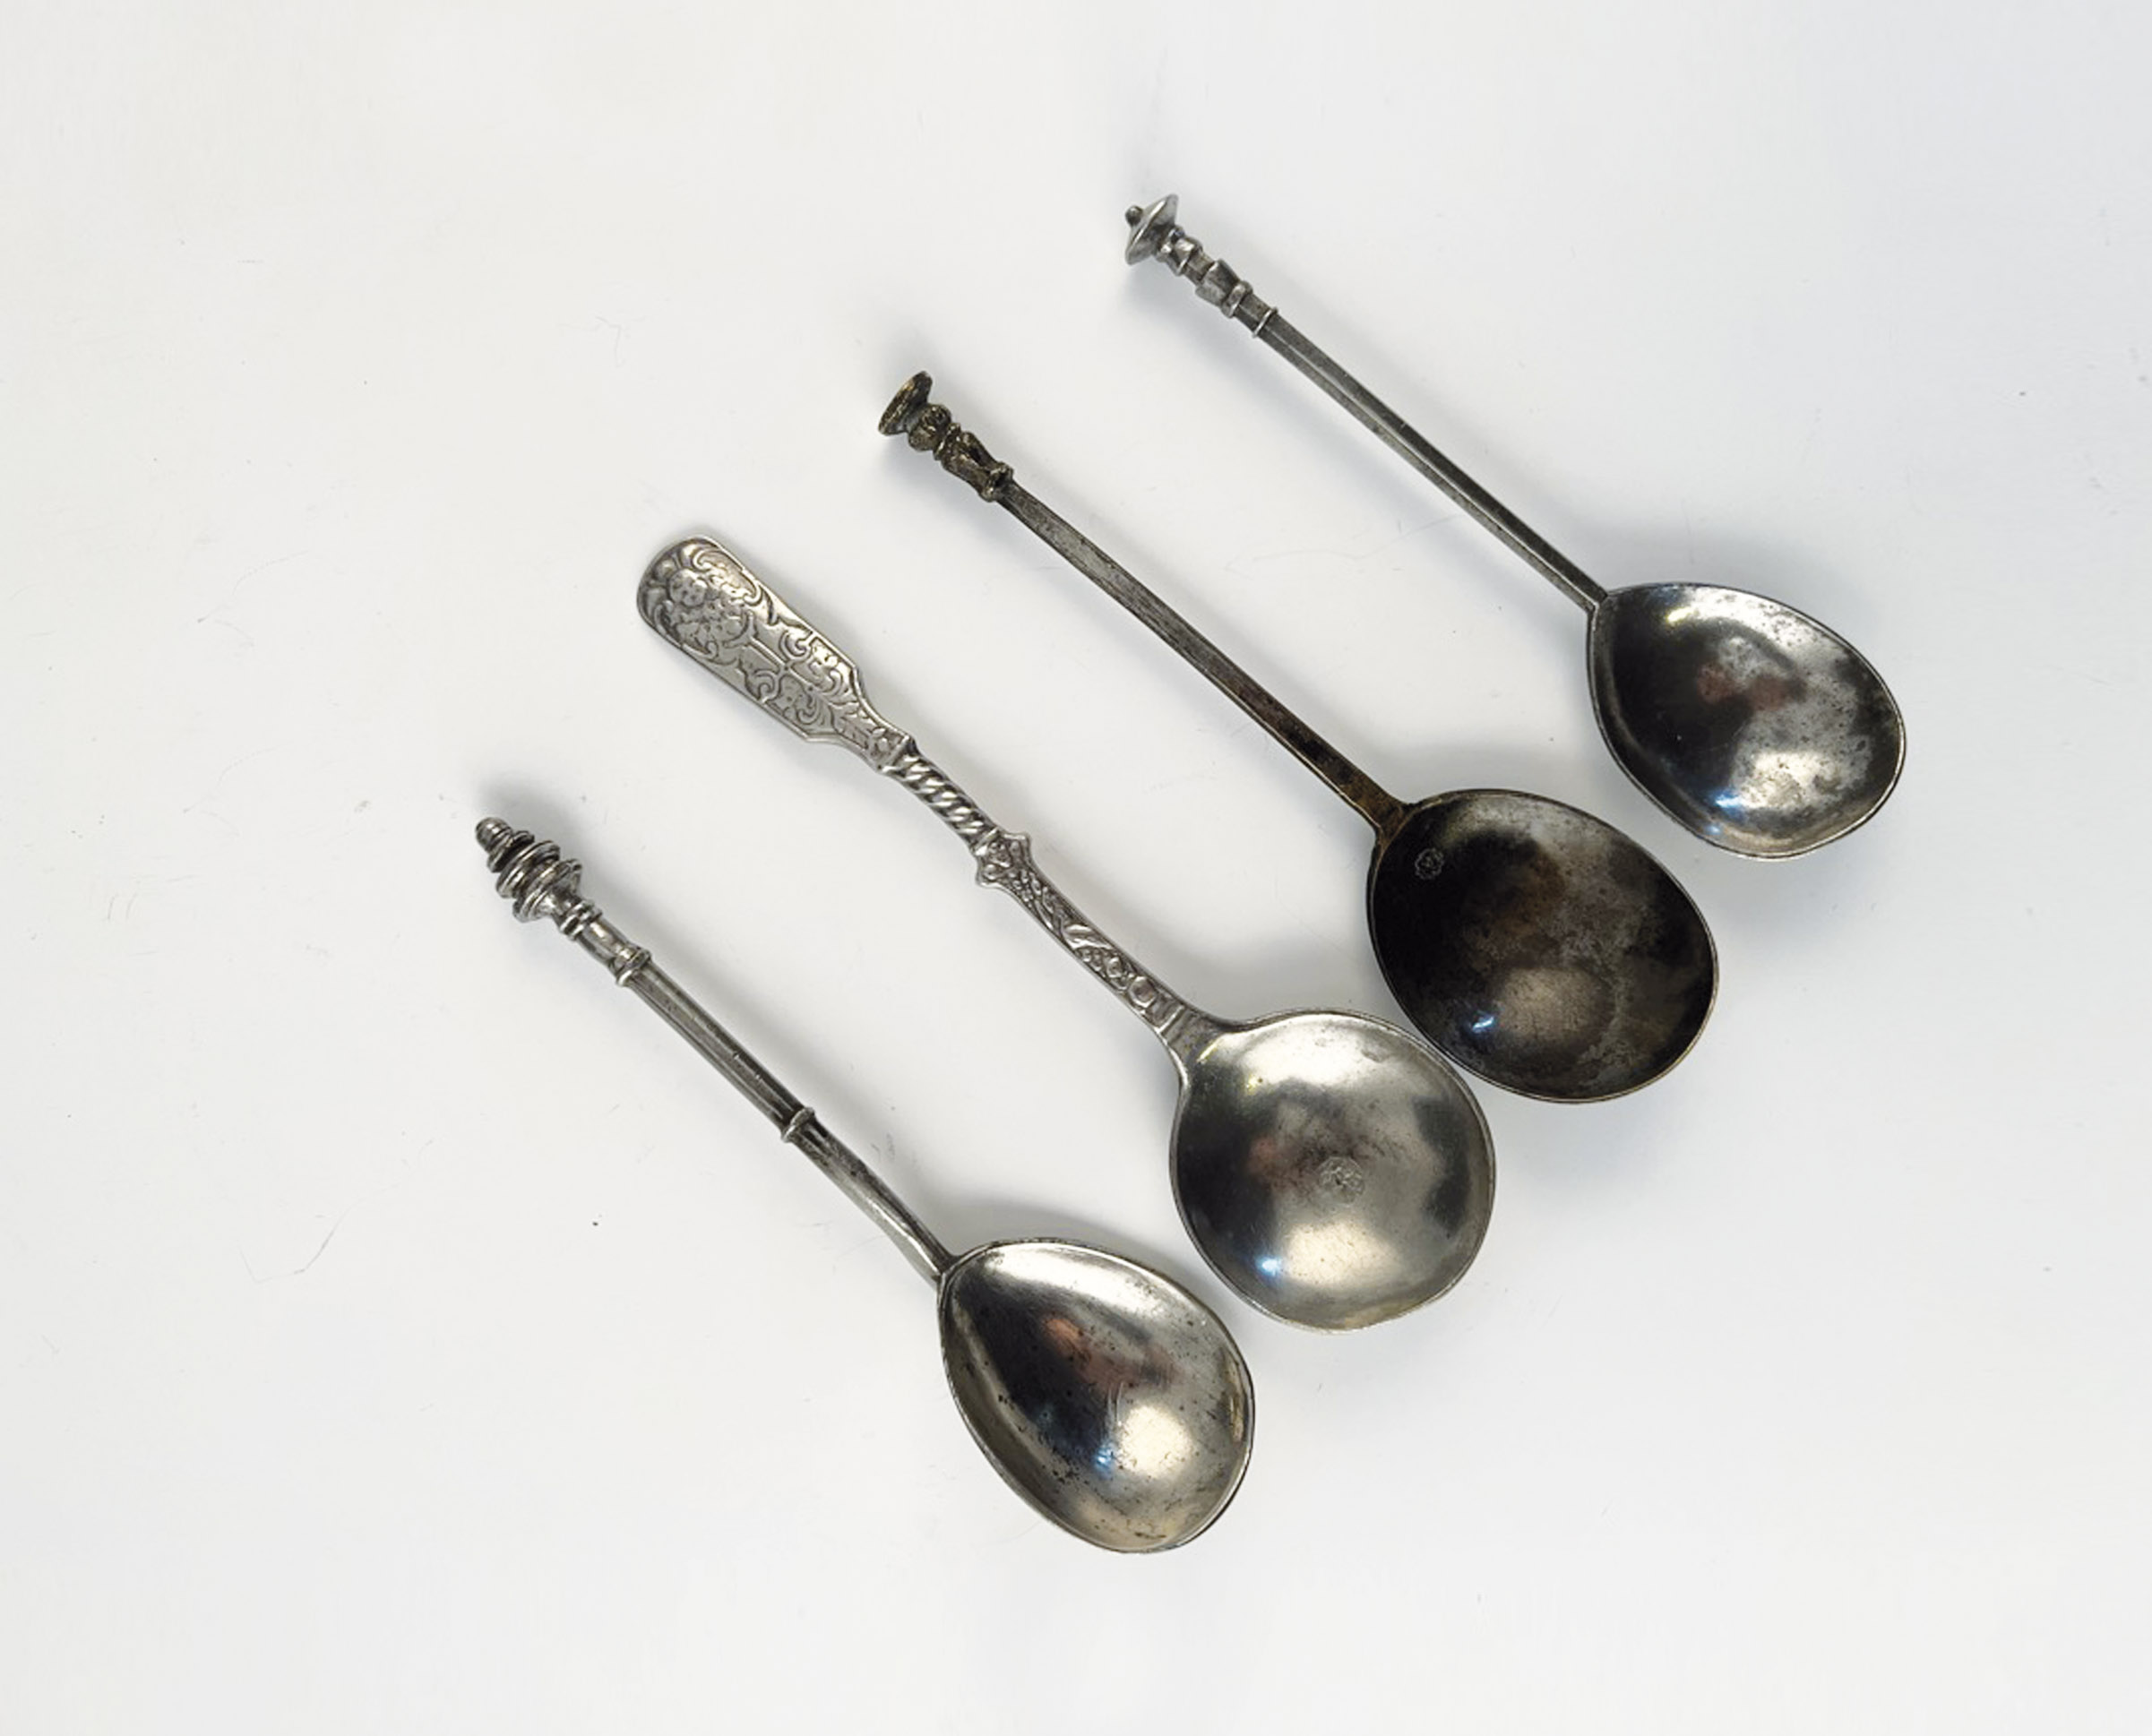 Four pewter spoons